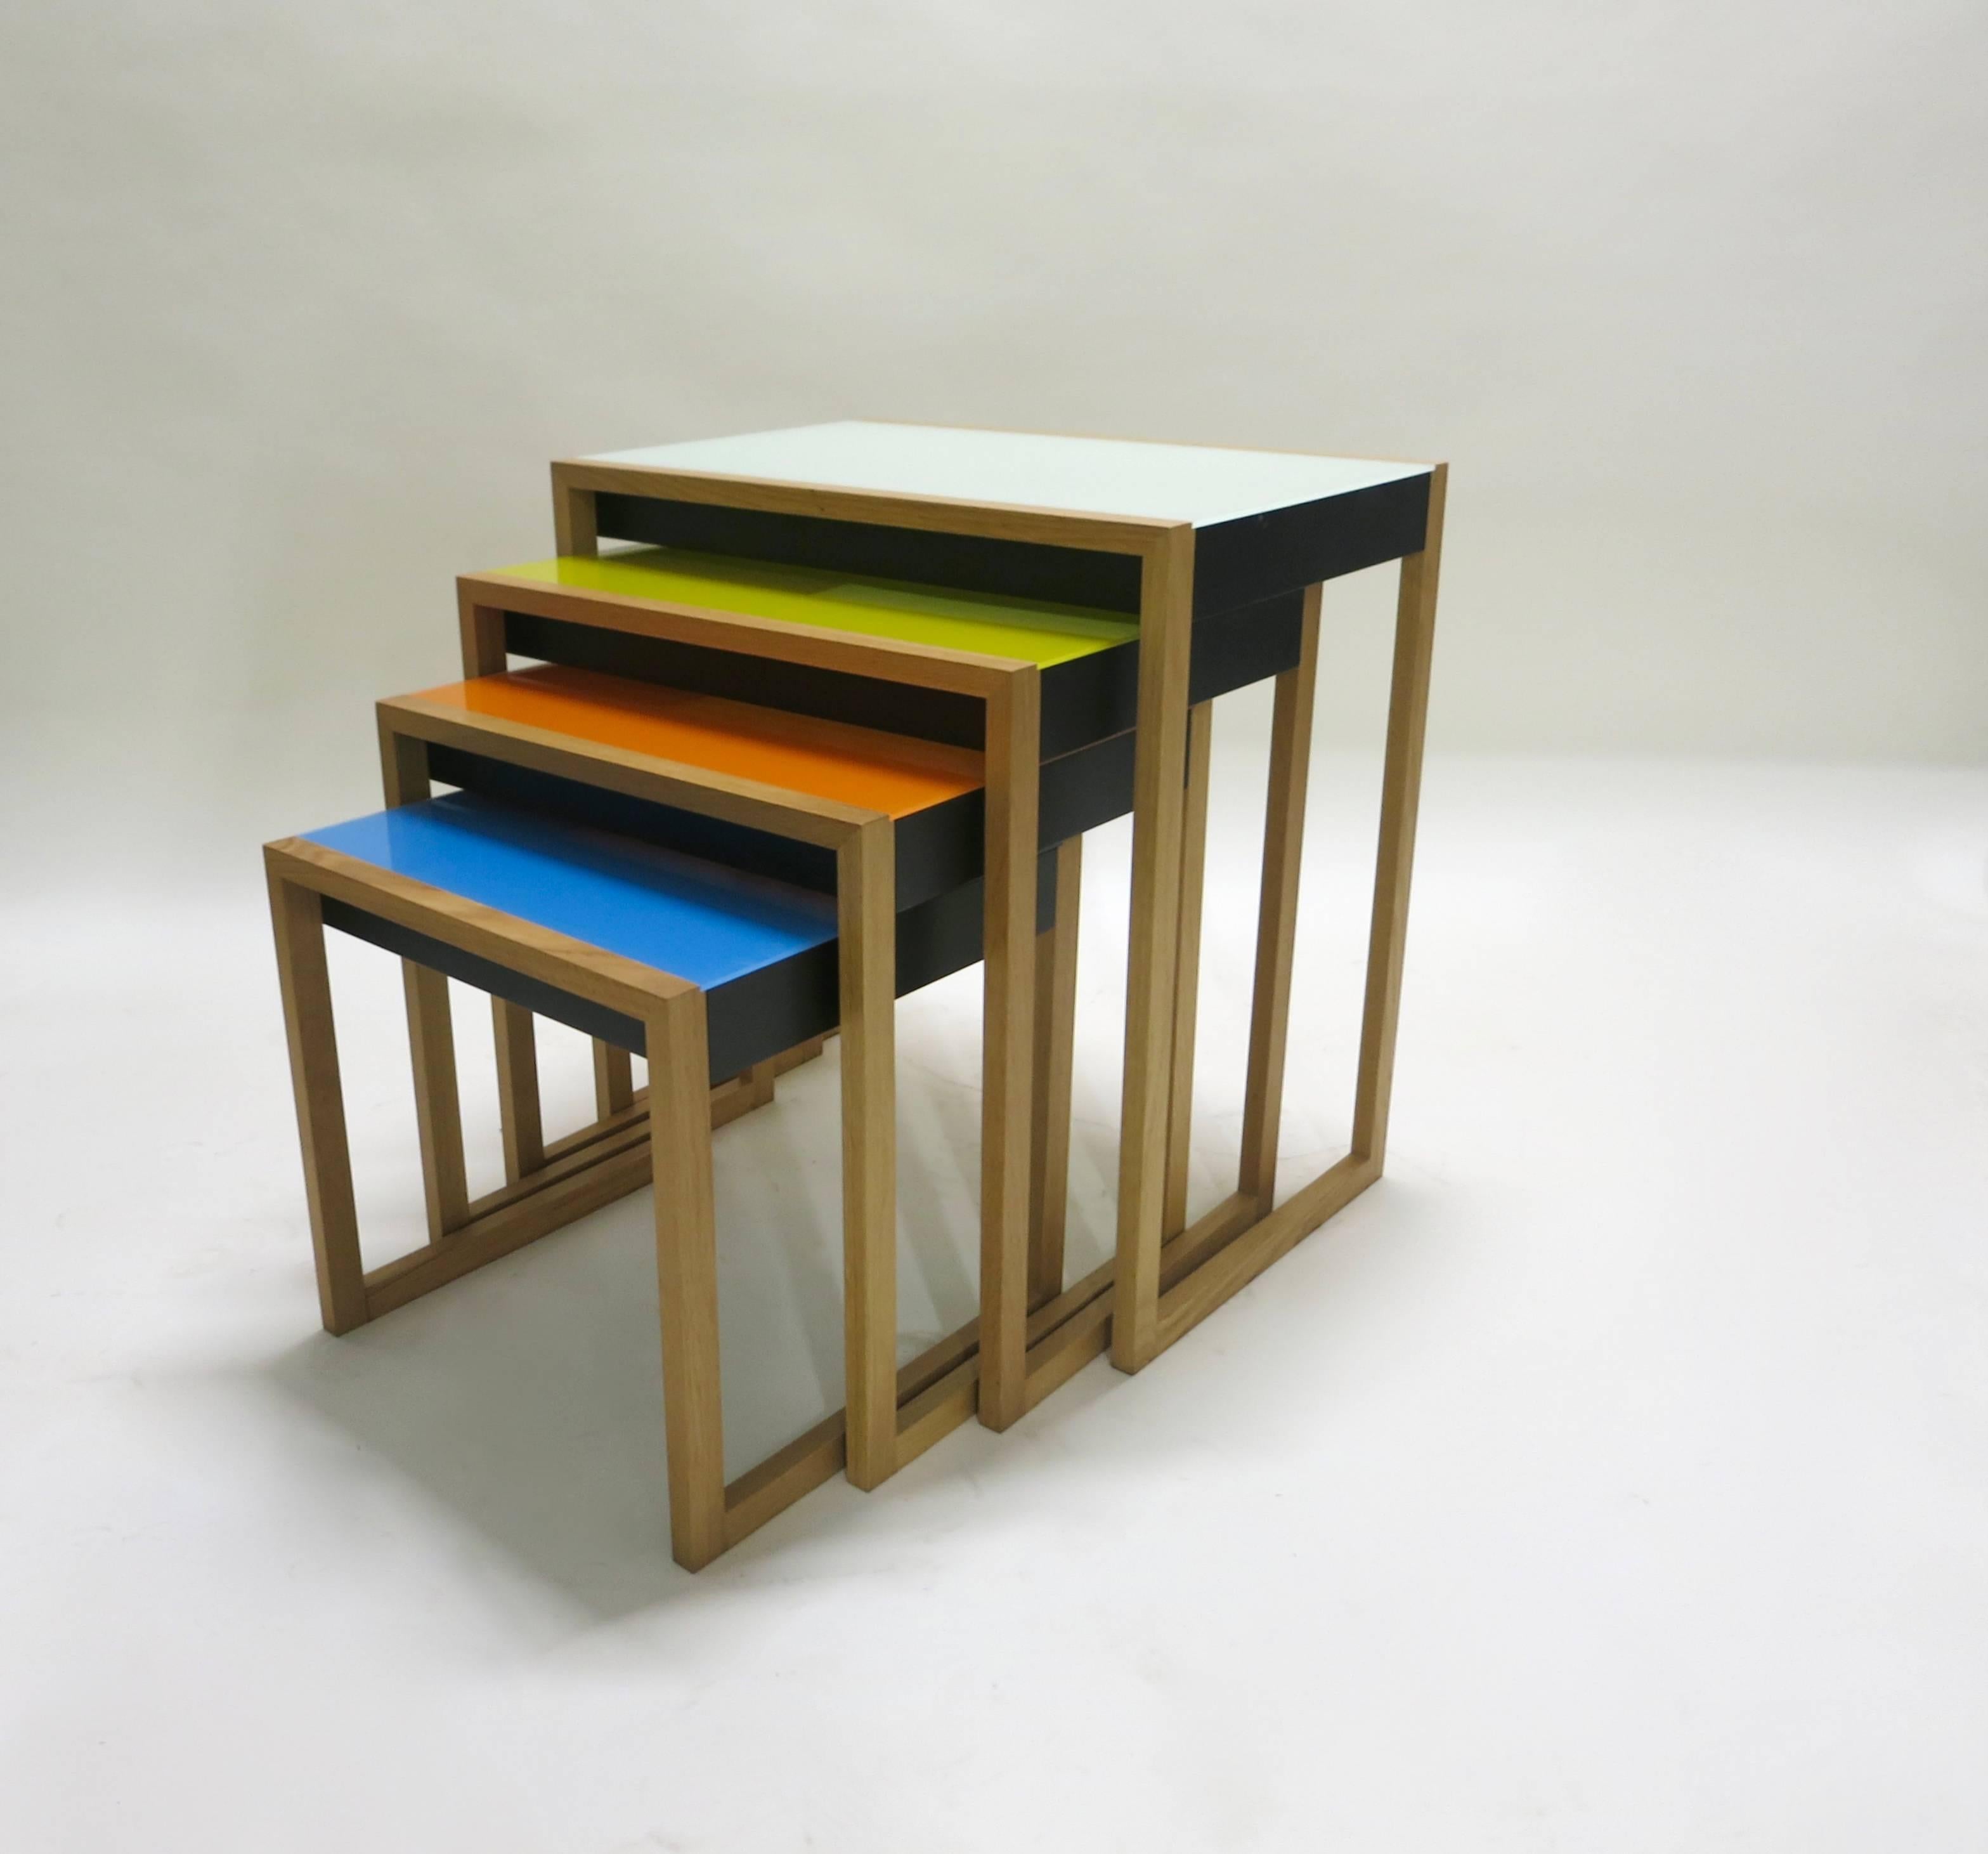 Set of four, sled-based nesting tables in oak and colored acrylic glass, originally designed in 1926 by Josef Albers and reissued by Vitra from their 2004 production, and each labeled. Colors in descending order from size: pale aqua, yellow, orange,